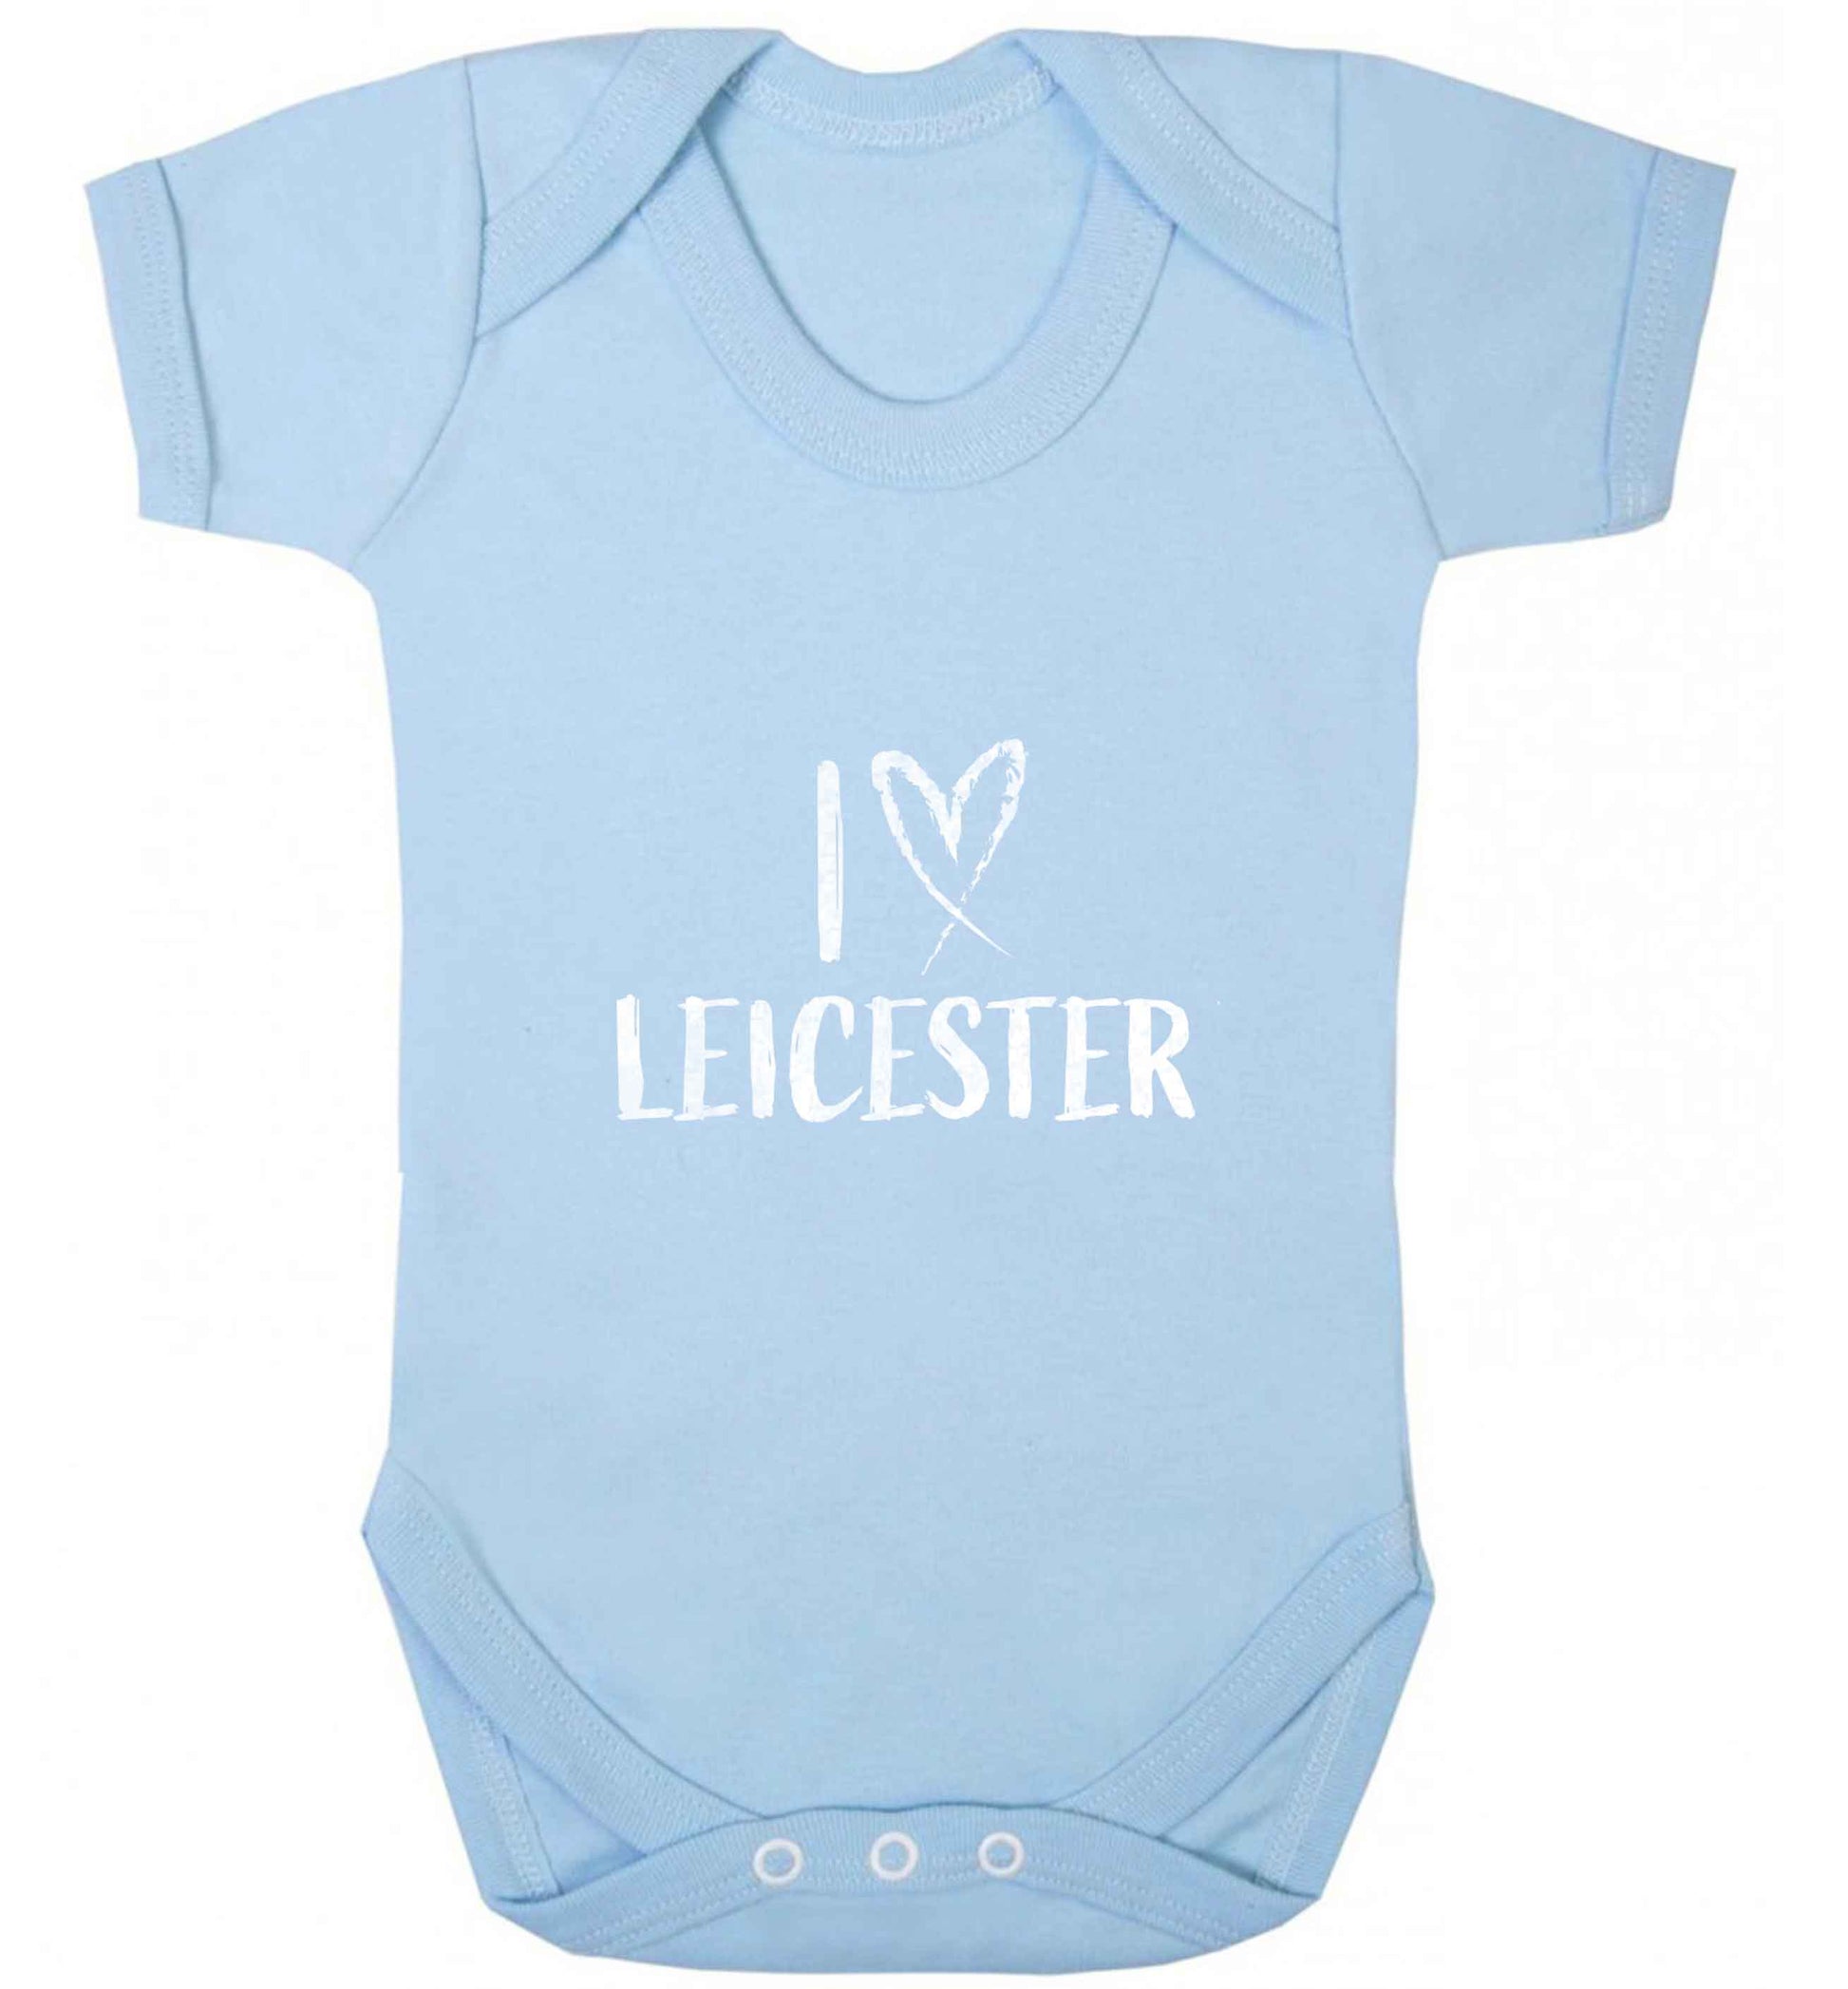 I love Leicester baby vest pale blue 18-24 months